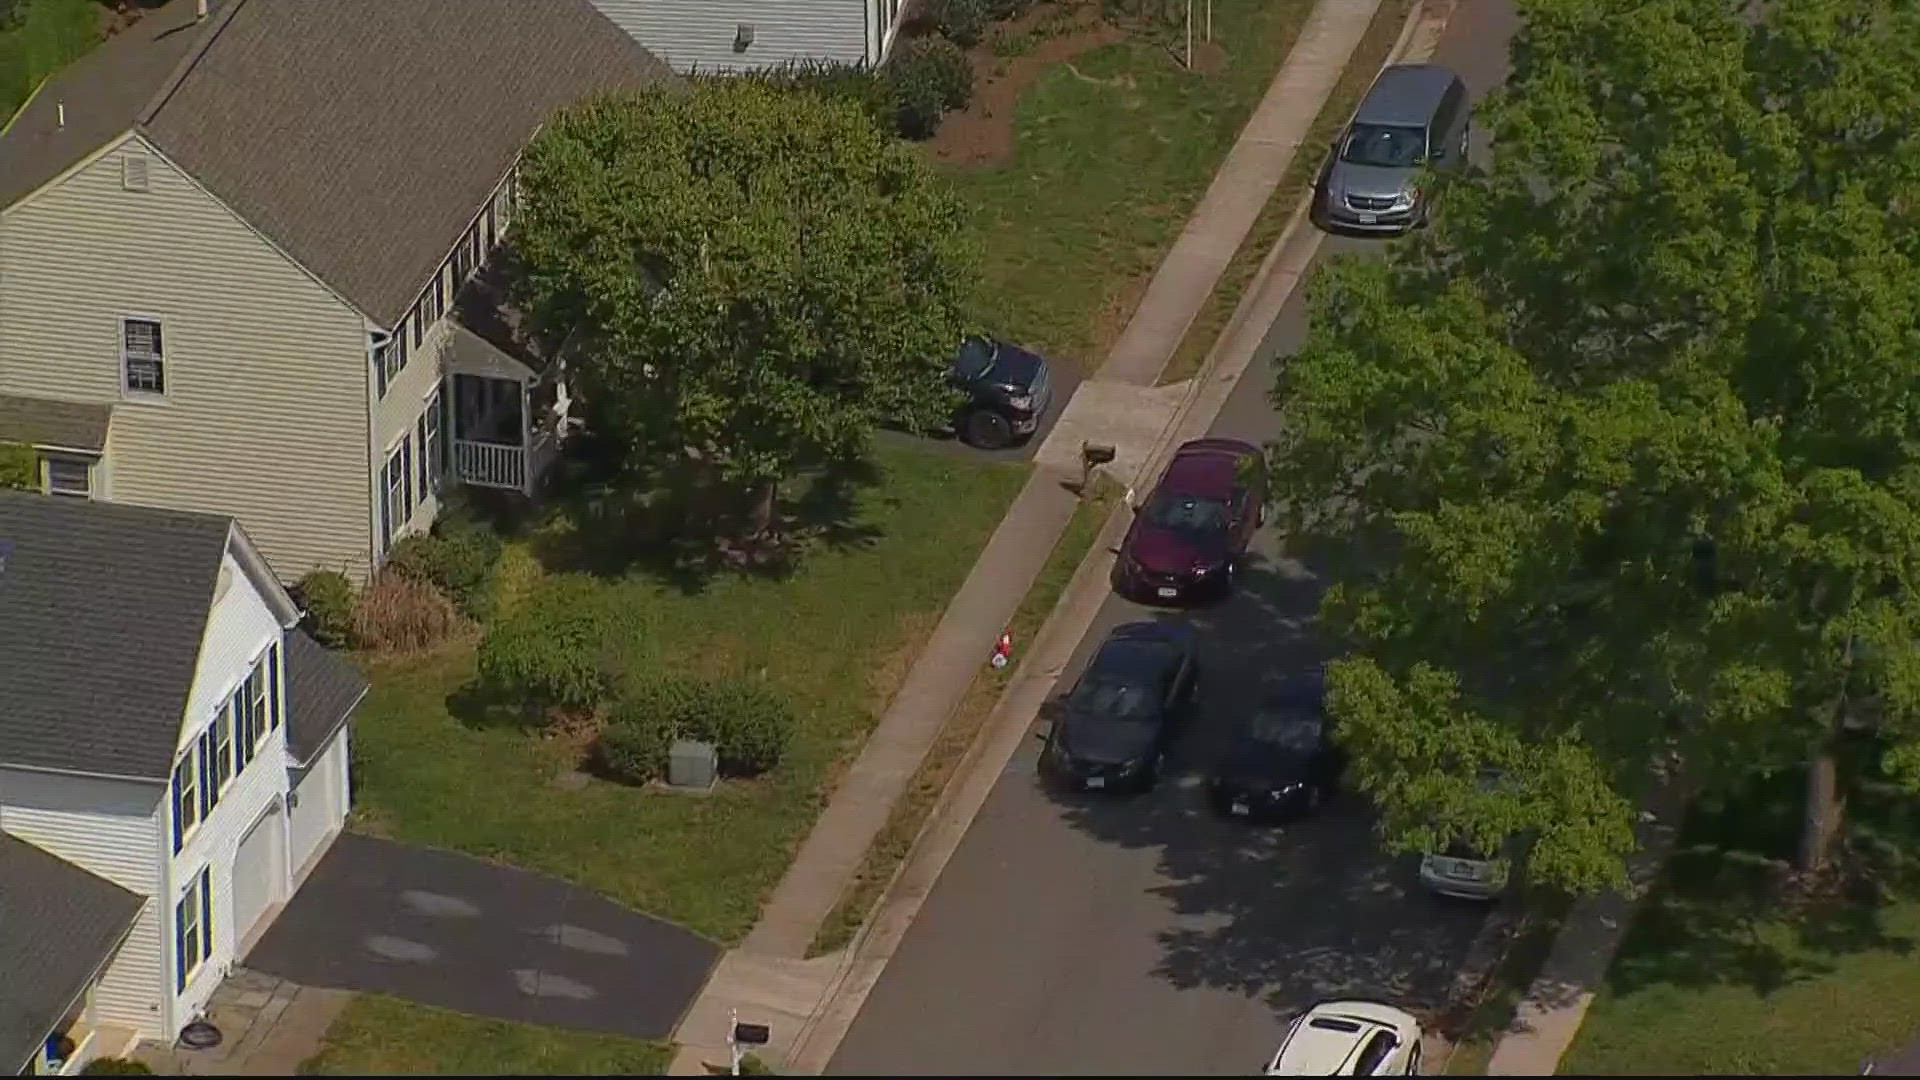 A suspect is in custody after a man and dog were stabbed in Fairfax County Tuesday morning.